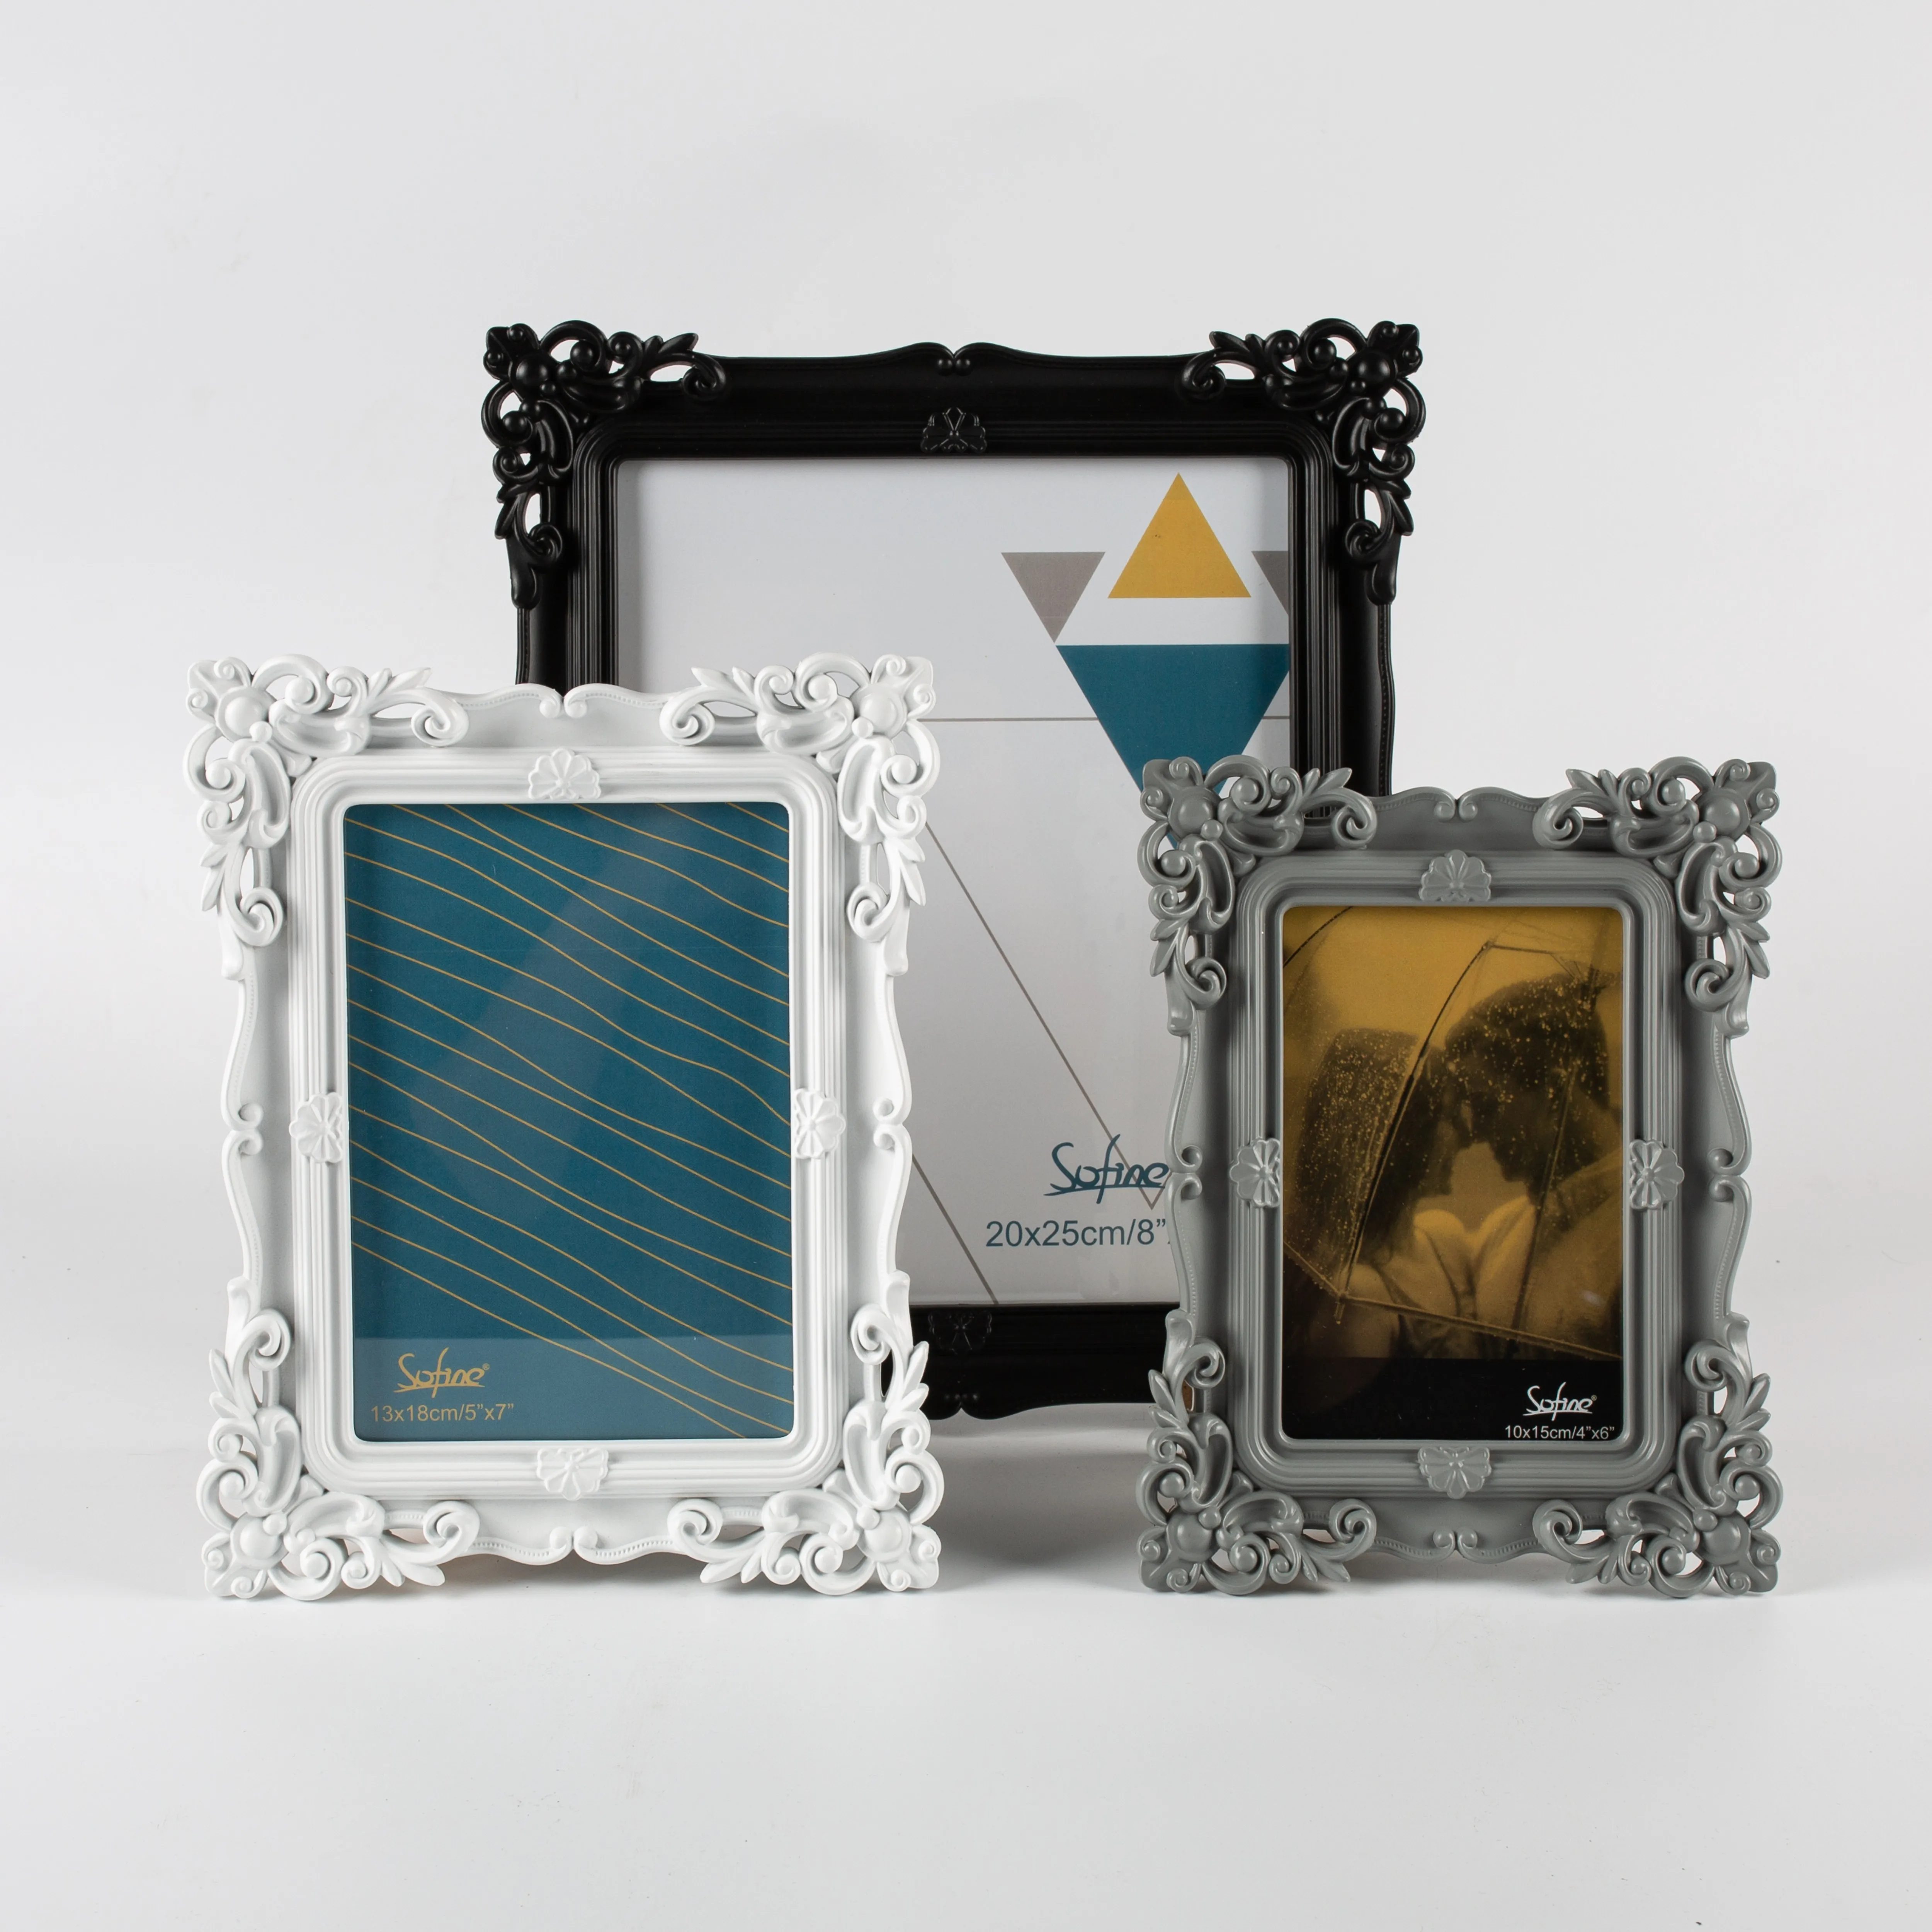 legaal Orkaan Terugroepen Sofine Modern Home Decoration Photo Fram Mini Funny Plastic 4x6 Photo Frame  Fotolijst - Buy Clear Plastic Photo Frames 4x6,Good Quality Best Price  Photo Frame,Home Decoration Picture Frame Product on Alibaba.com